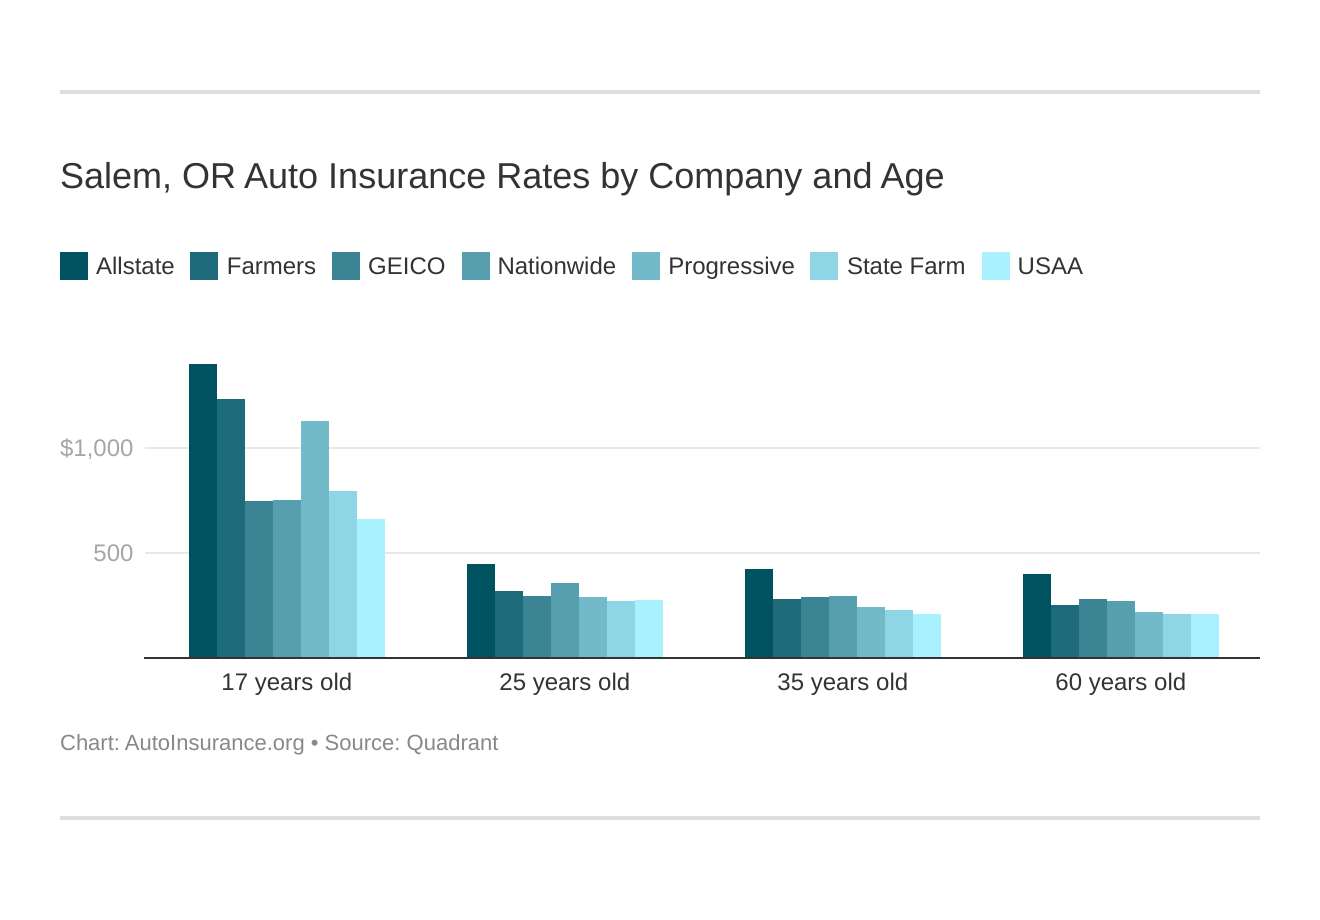 Salem, OR Auto Insurance Rates by Company and Age